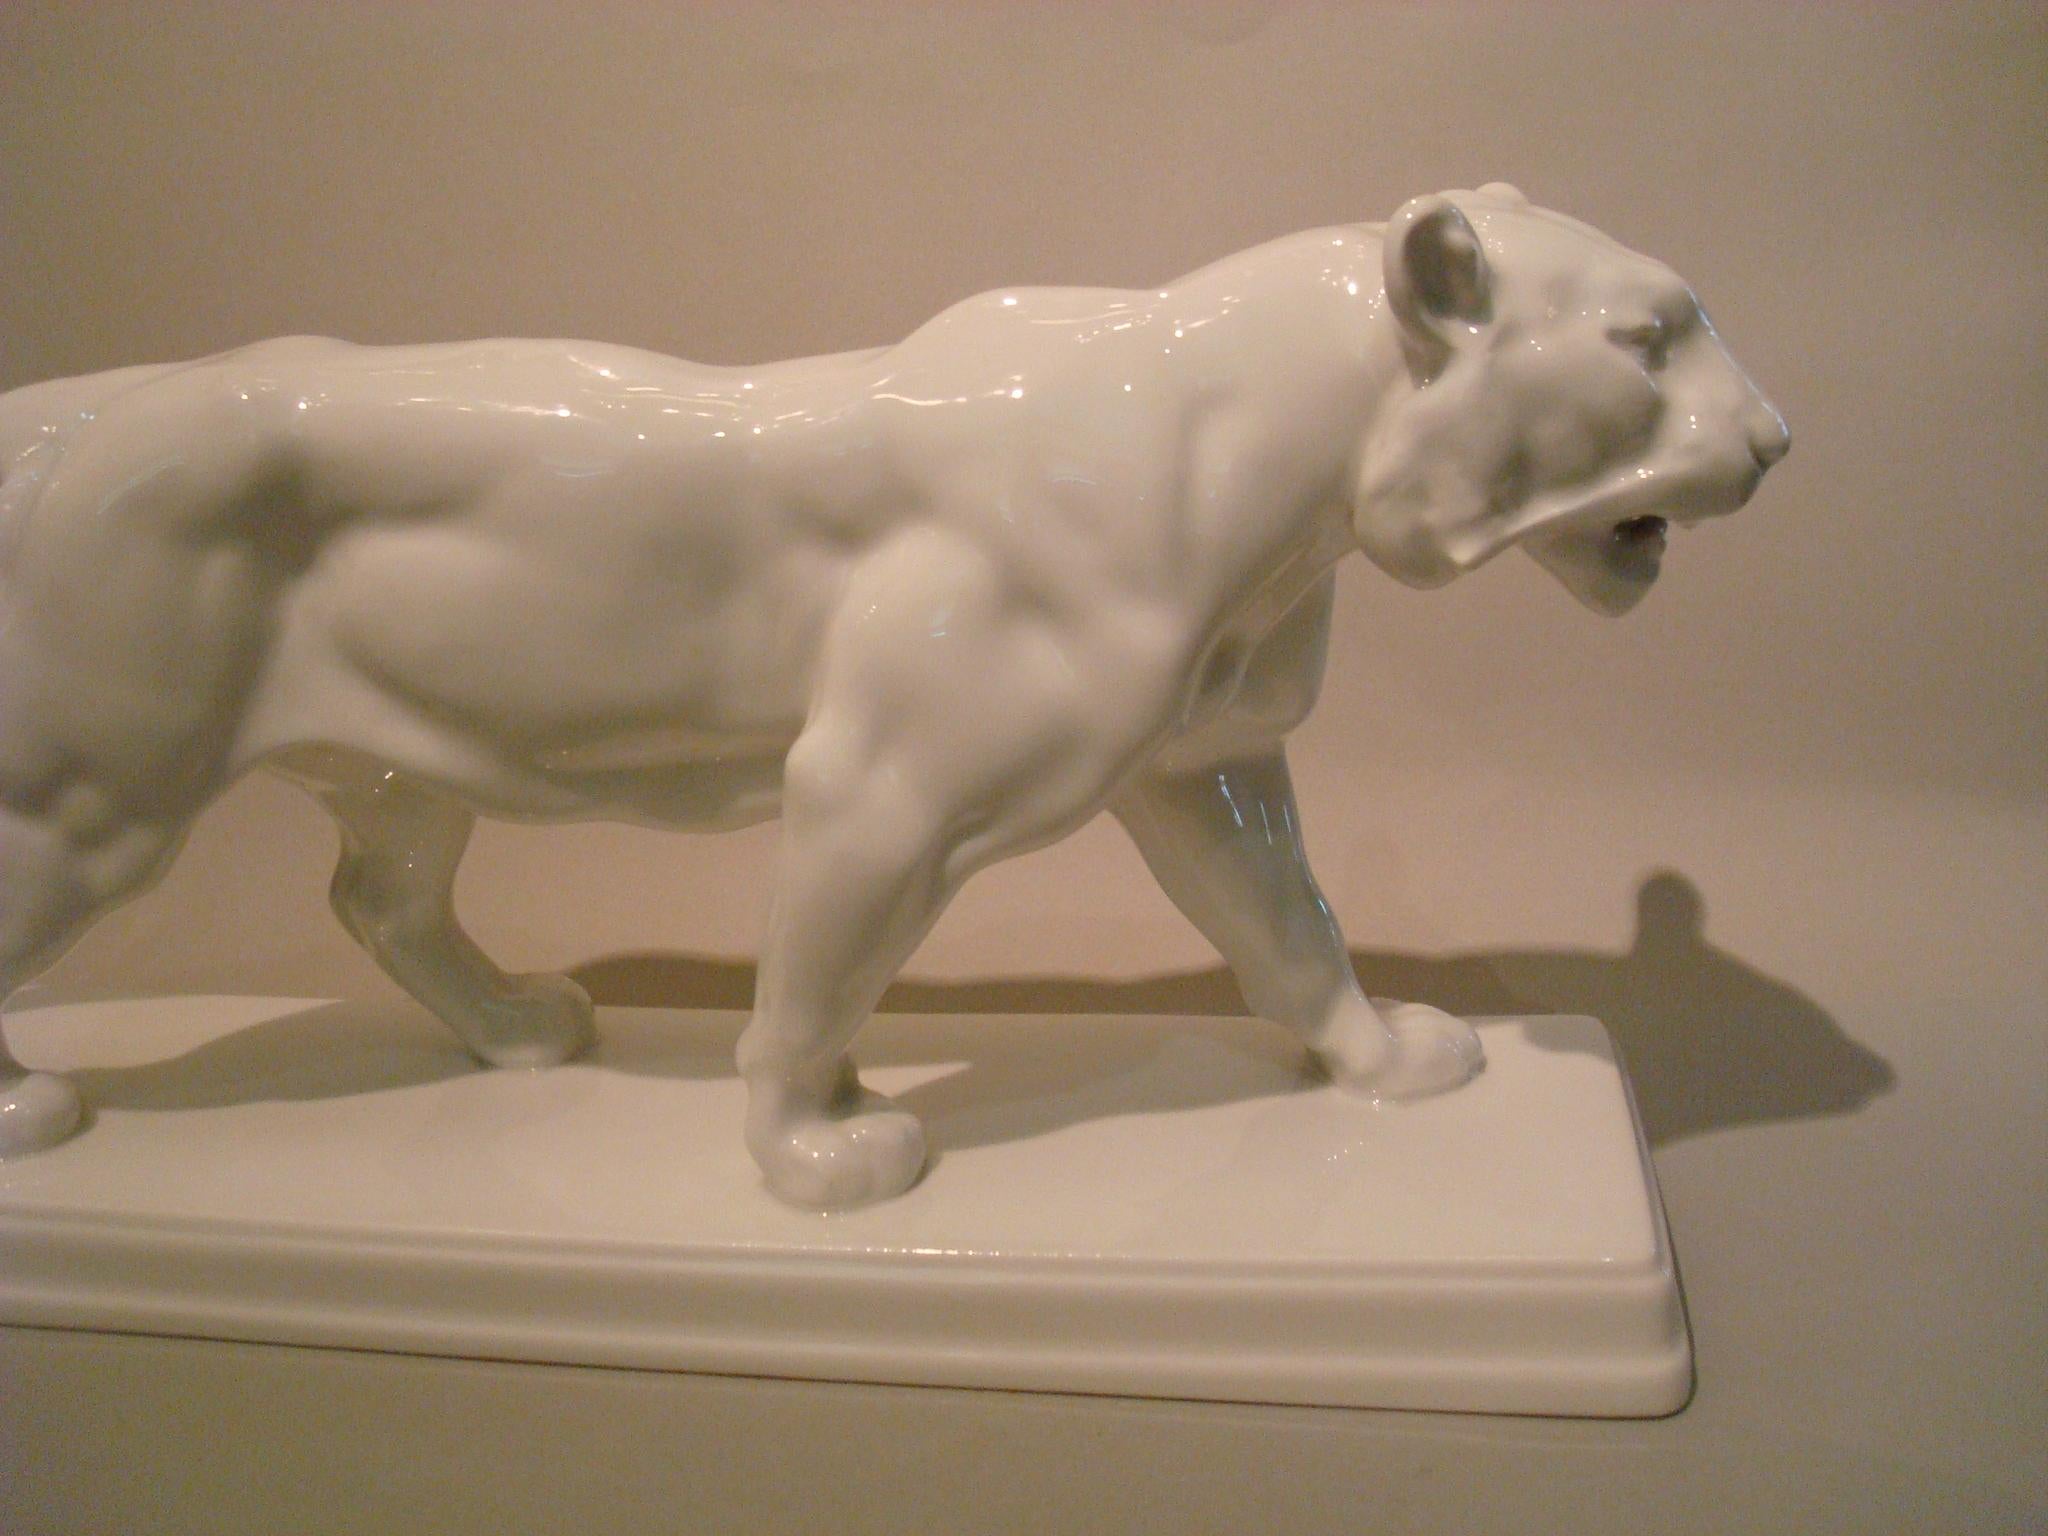 20th century KPM Berlin / Walking white tiger statuette - Antoine Louis Barye
This listing is for a stunning statuette of a walking white tiger. Designed by Antoine Louis Barye and created by KPM Berlin. All white design with wonderful muscle